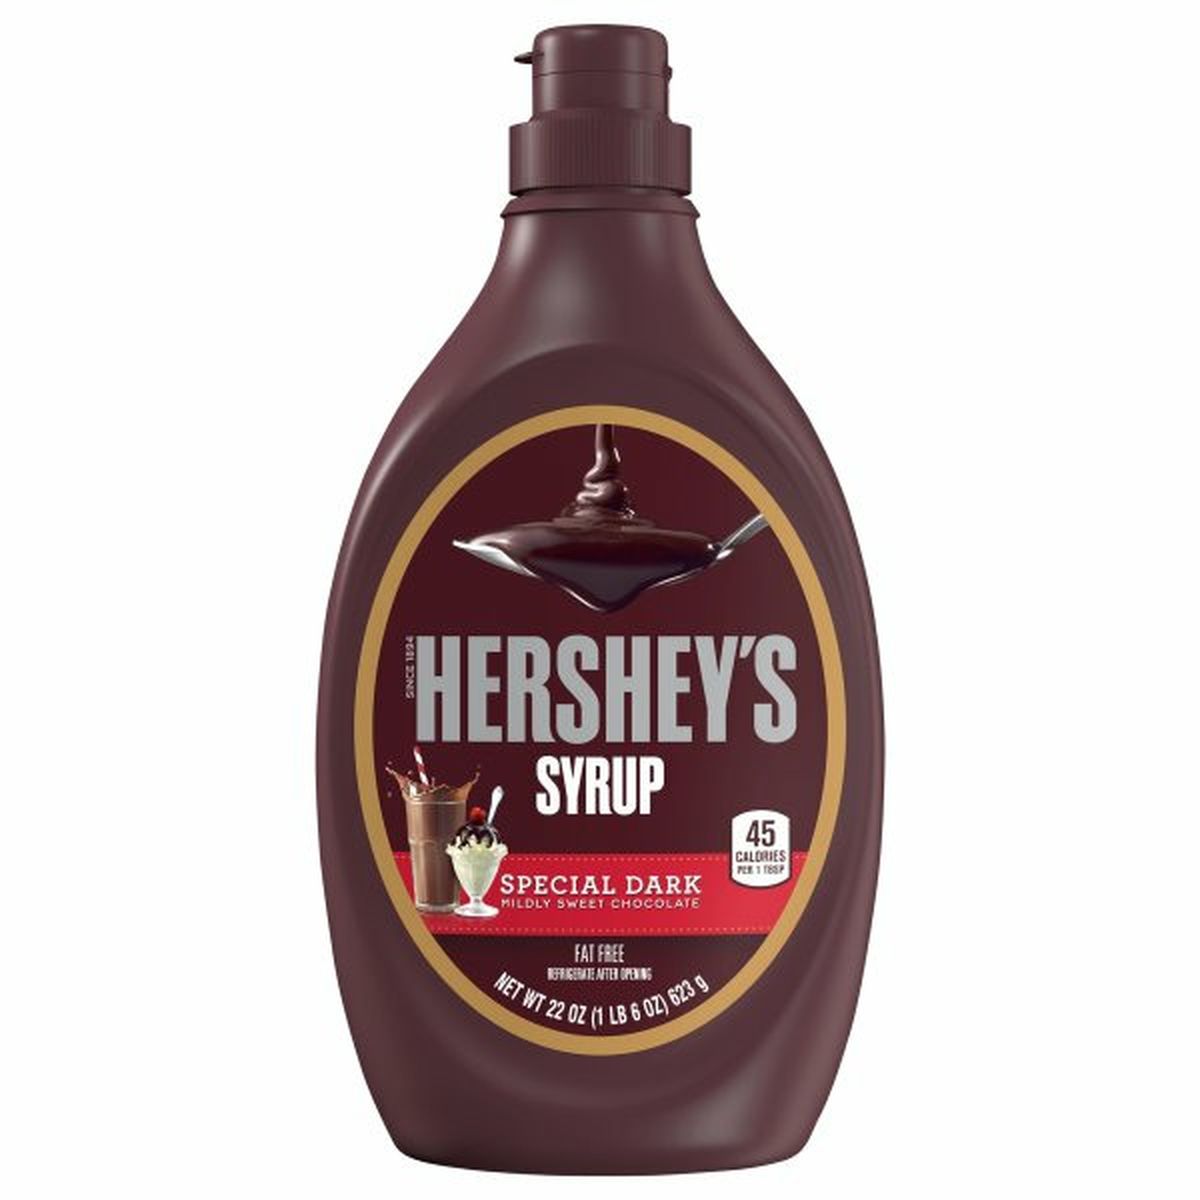 Calories in Hershey's Syrup, Fat Free, Special Dark